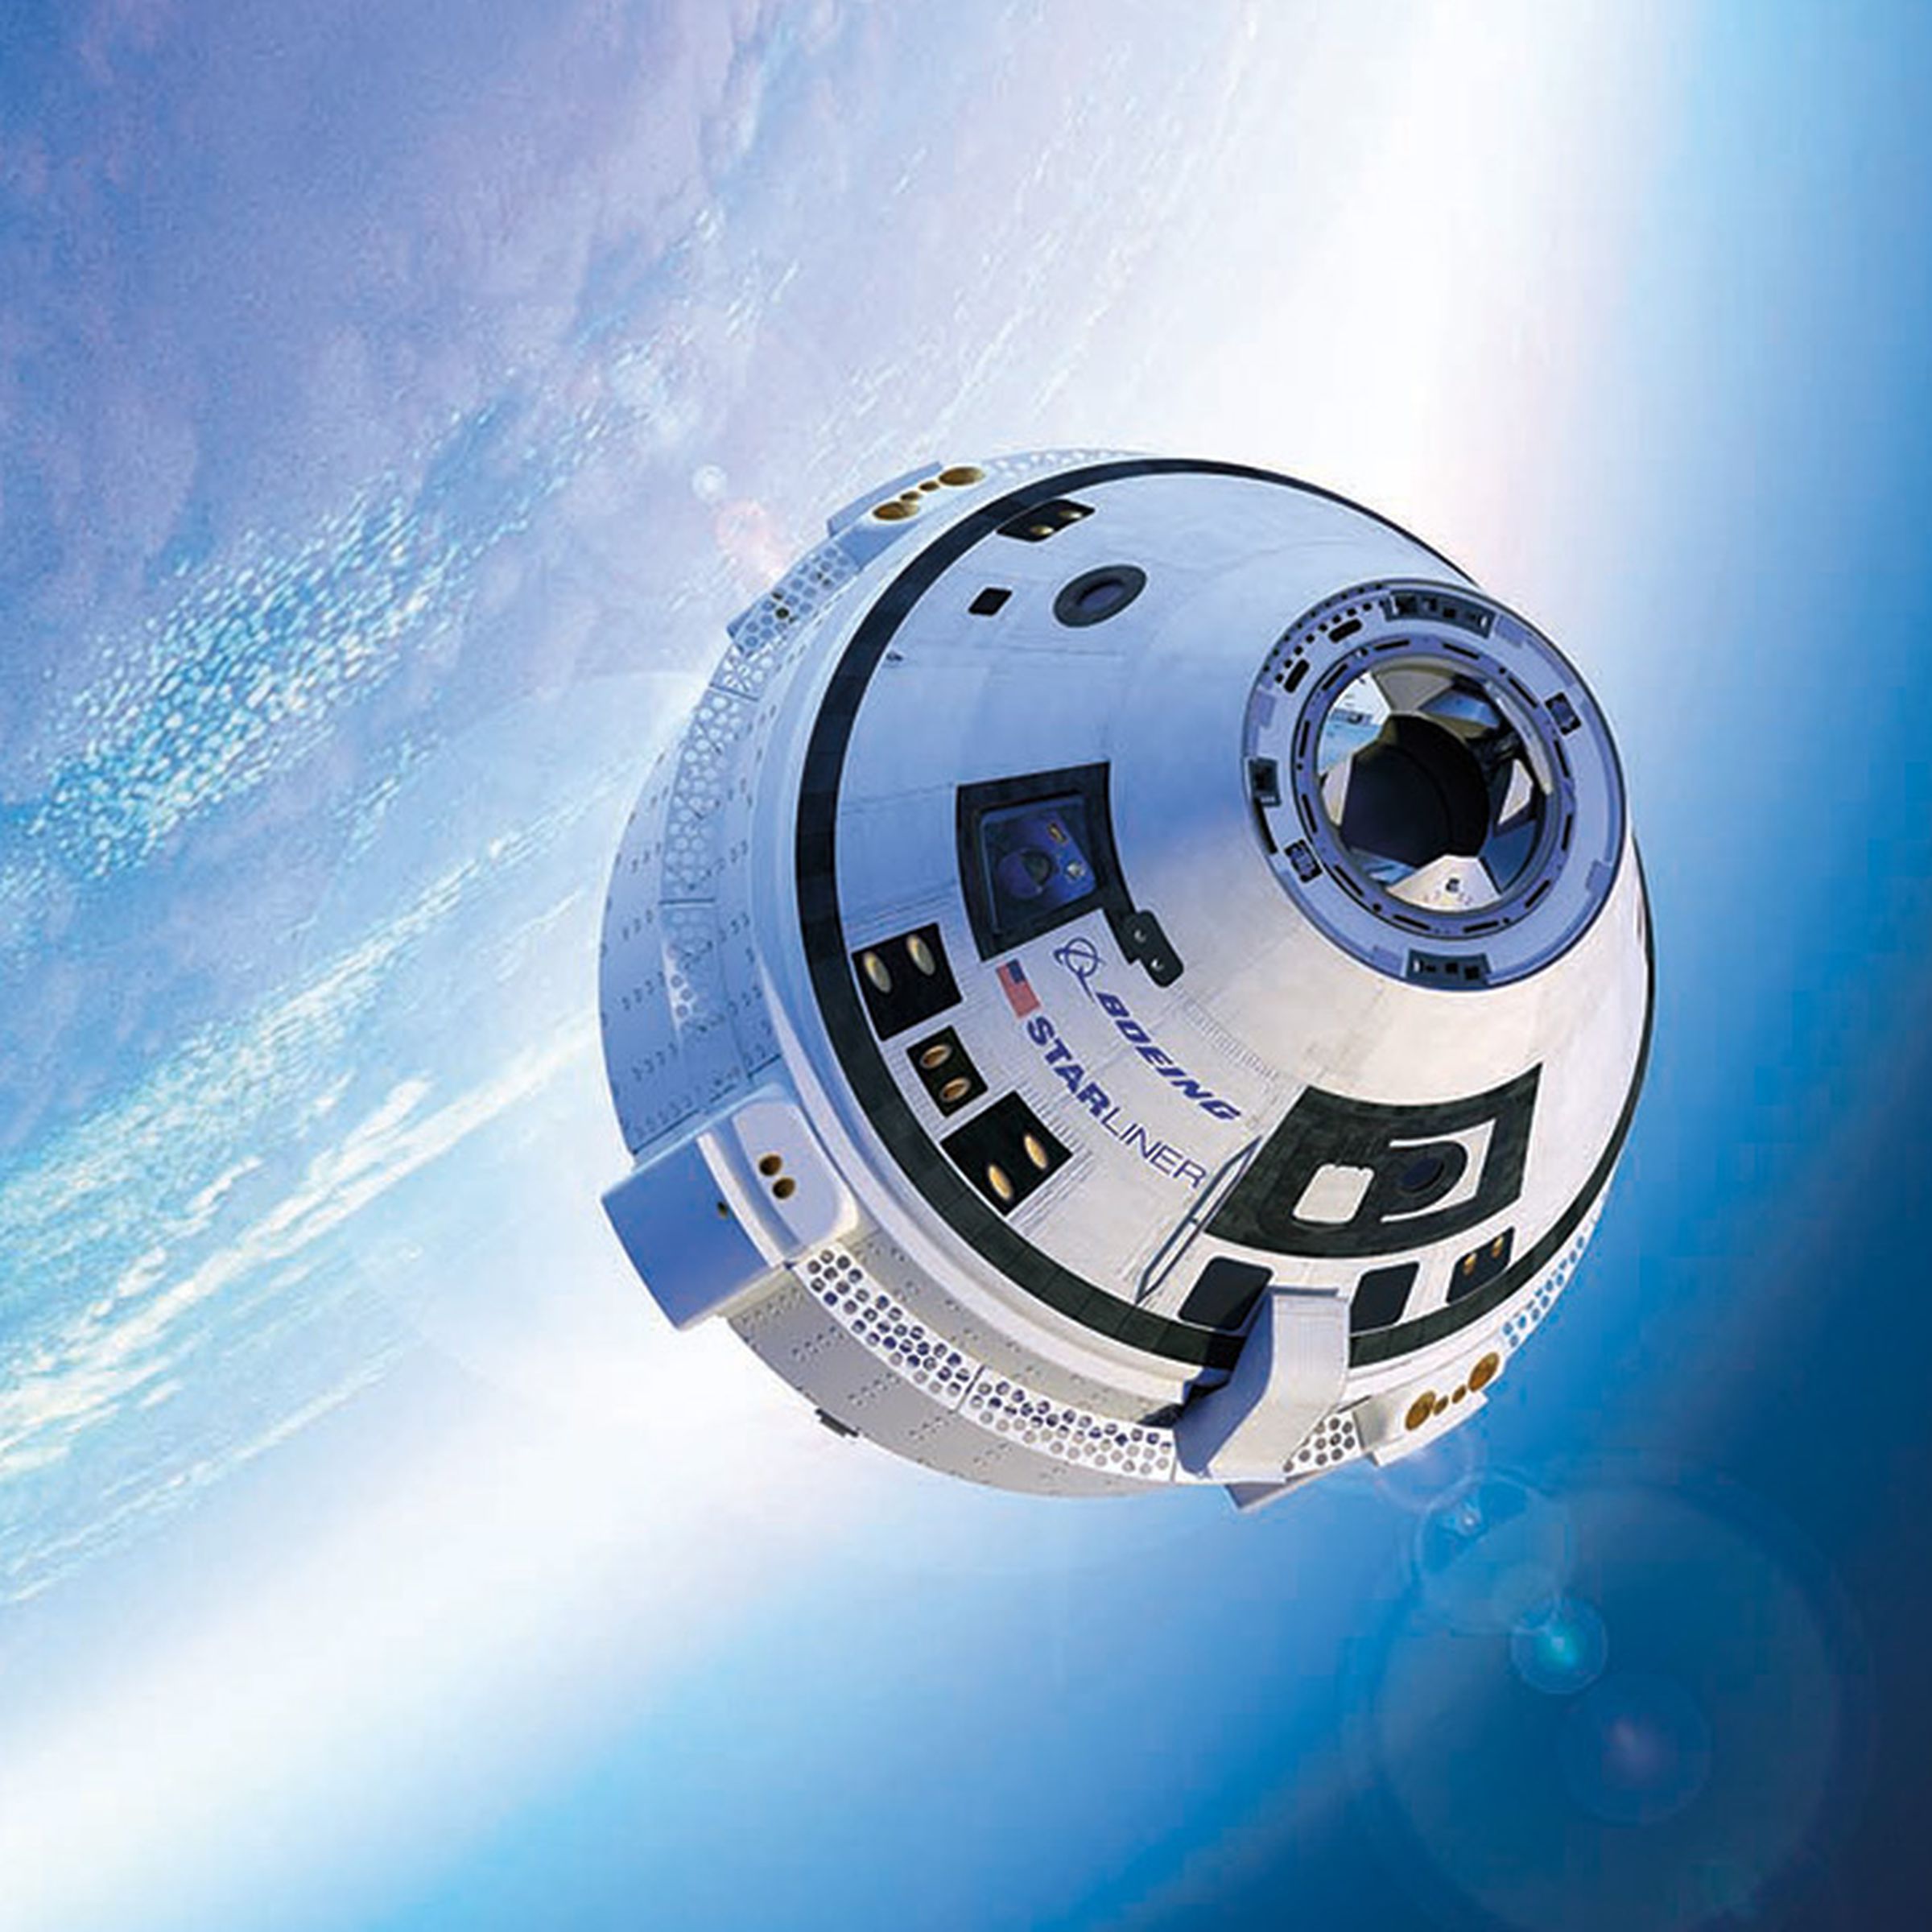 An artistic rendering of Boeing’s CST-100 Starliner